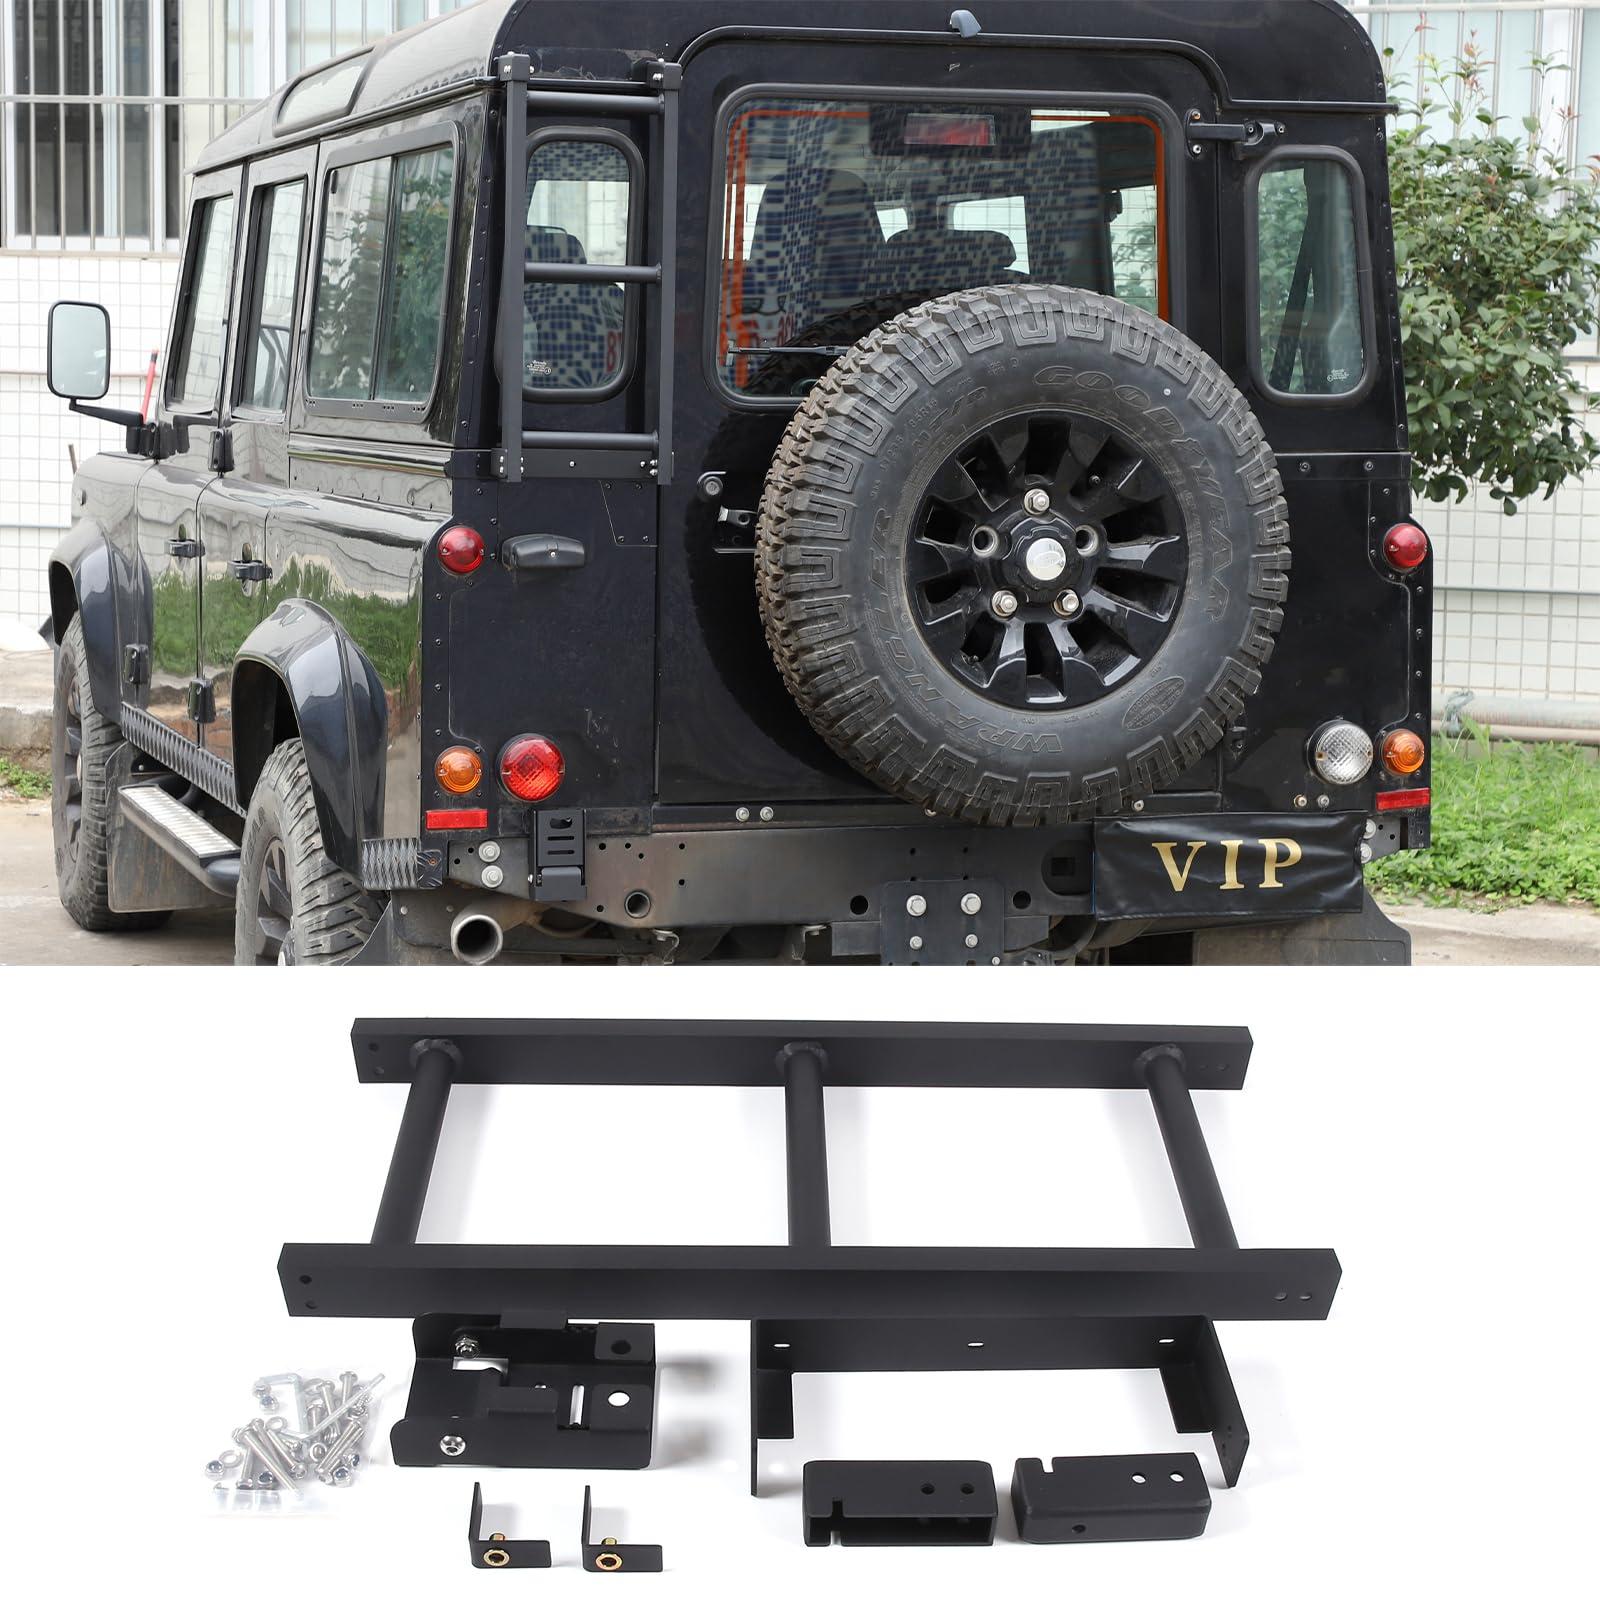 Uieohout Car Rear Ladder Fit for Land Rover Defender 2004-2019, Rear Door Tailgate Ladder, Rear Window Ladder, Aluminum Alloy (Type C)